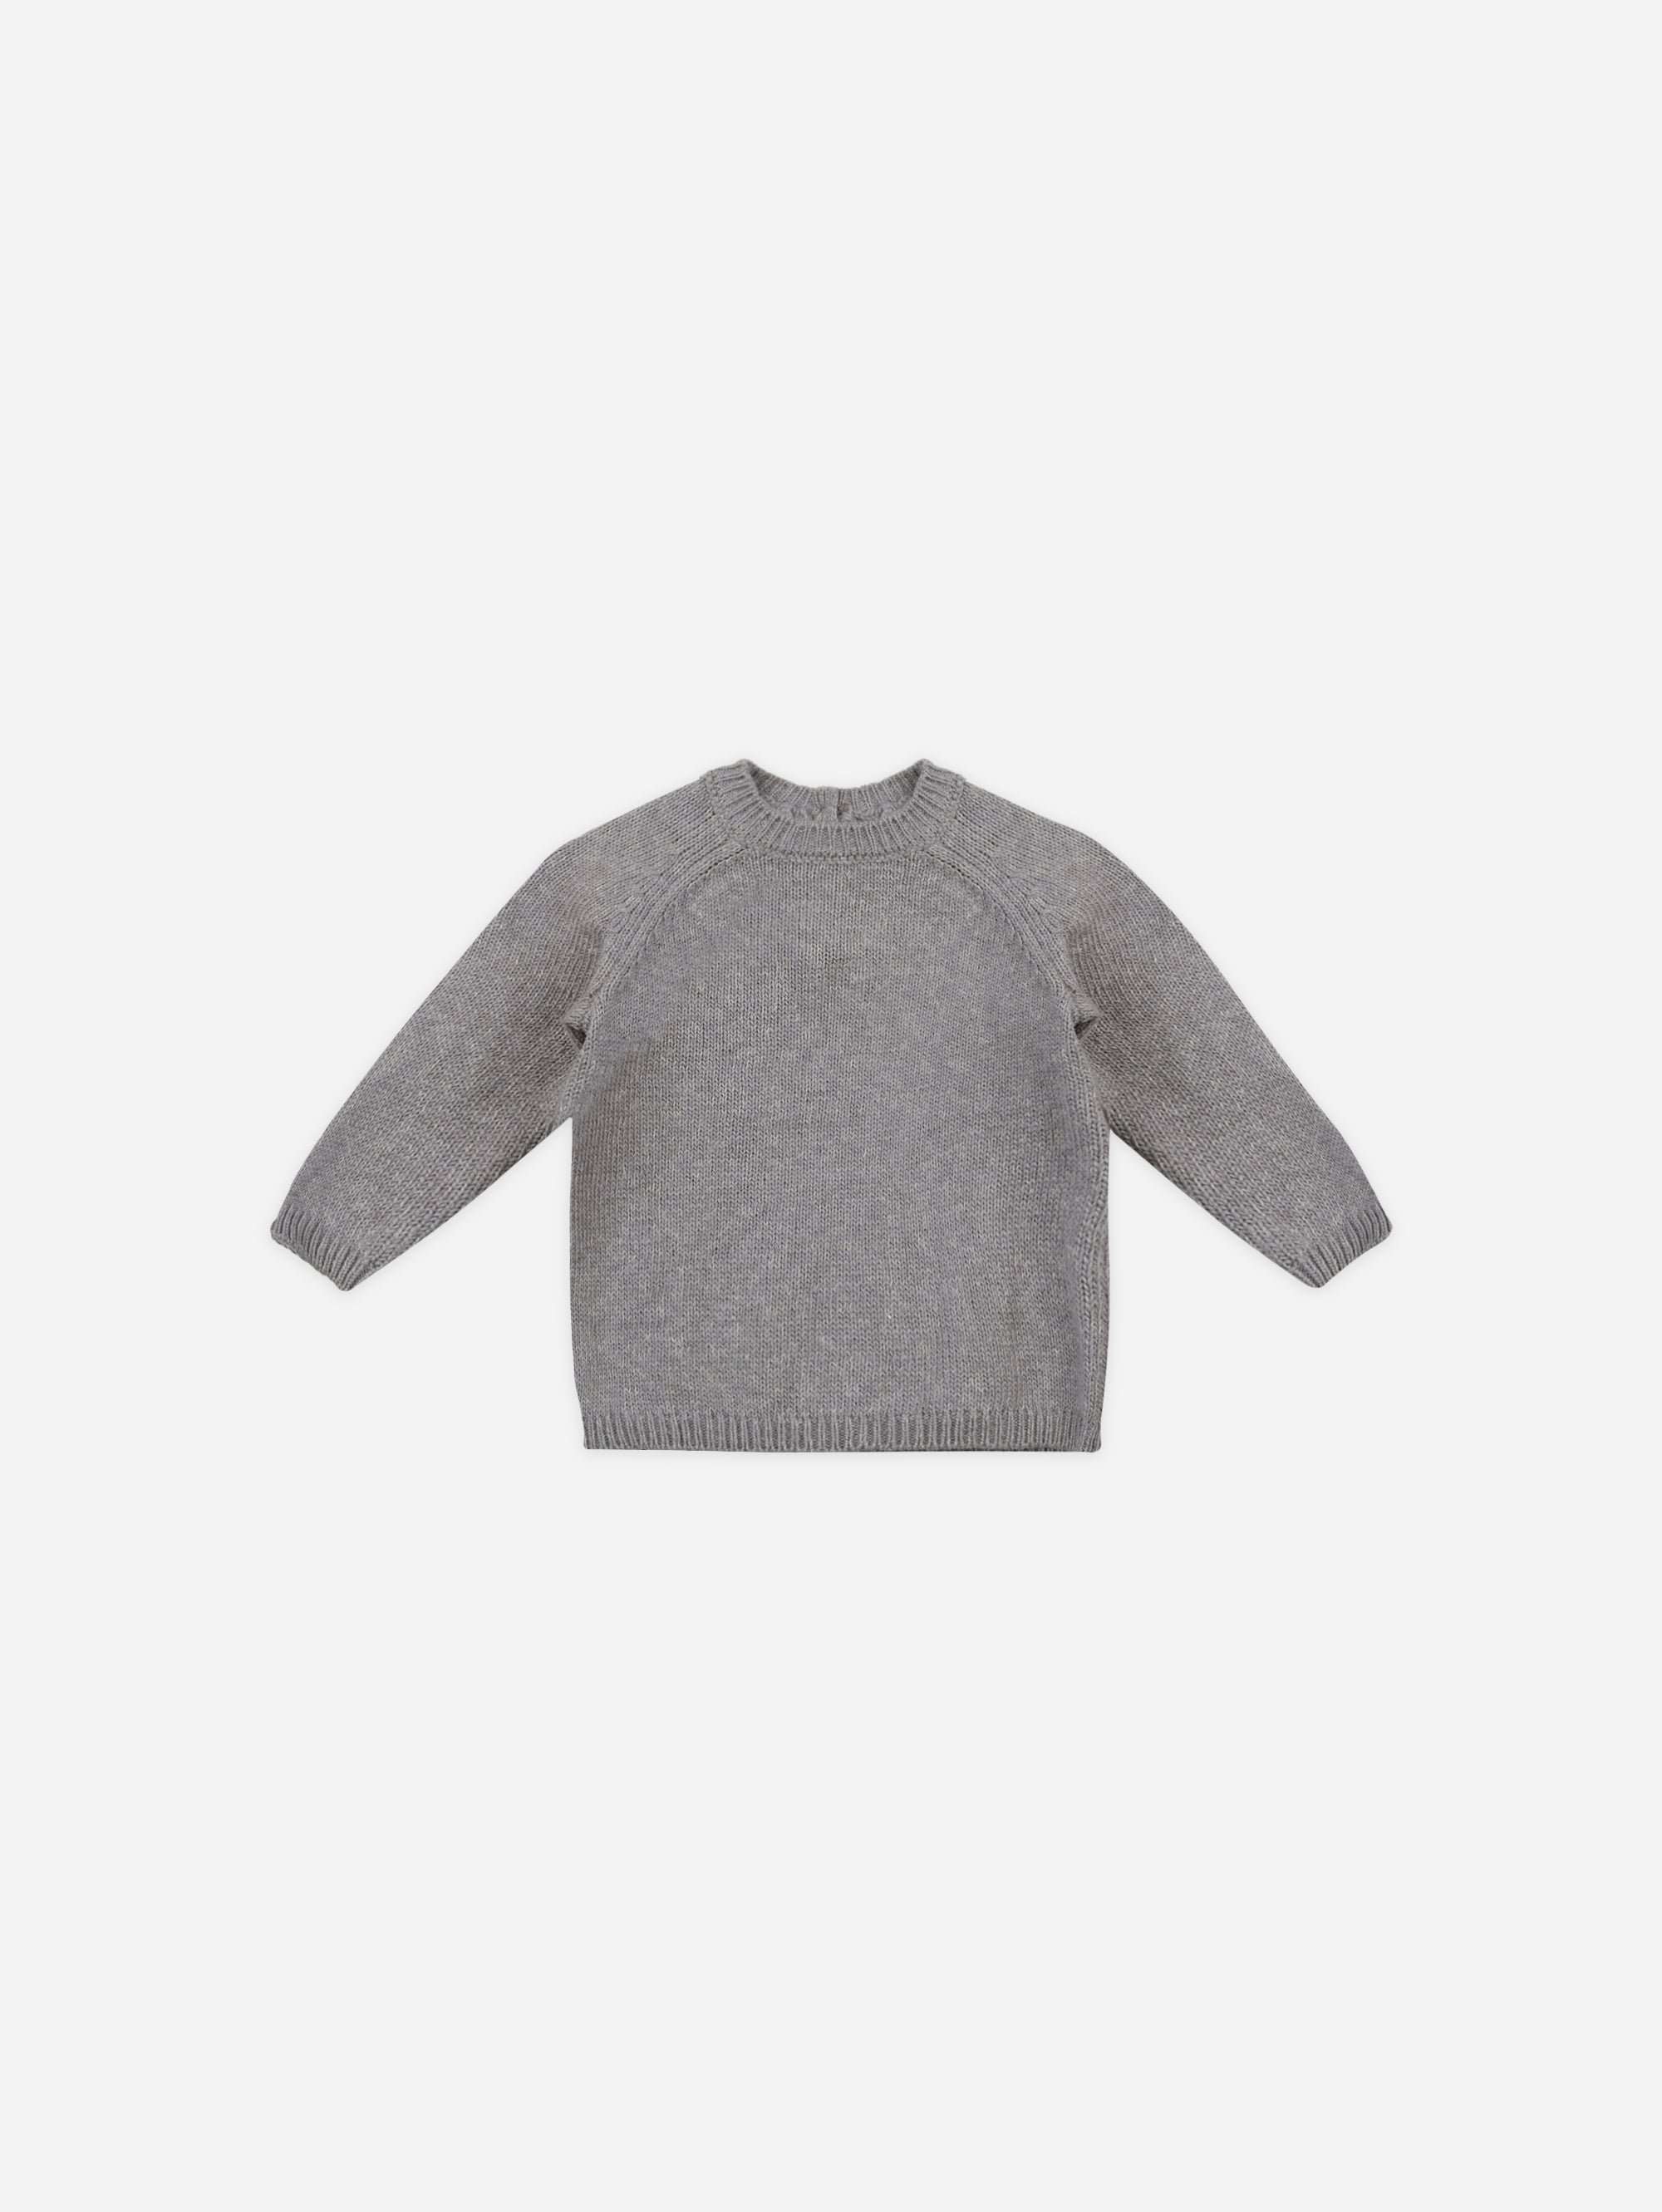 Knit Sweater || Heathered Lagoon - Rylee + Cru | Kids Clothes | Trendy Baby Clothes | Modern Infant Outfits |